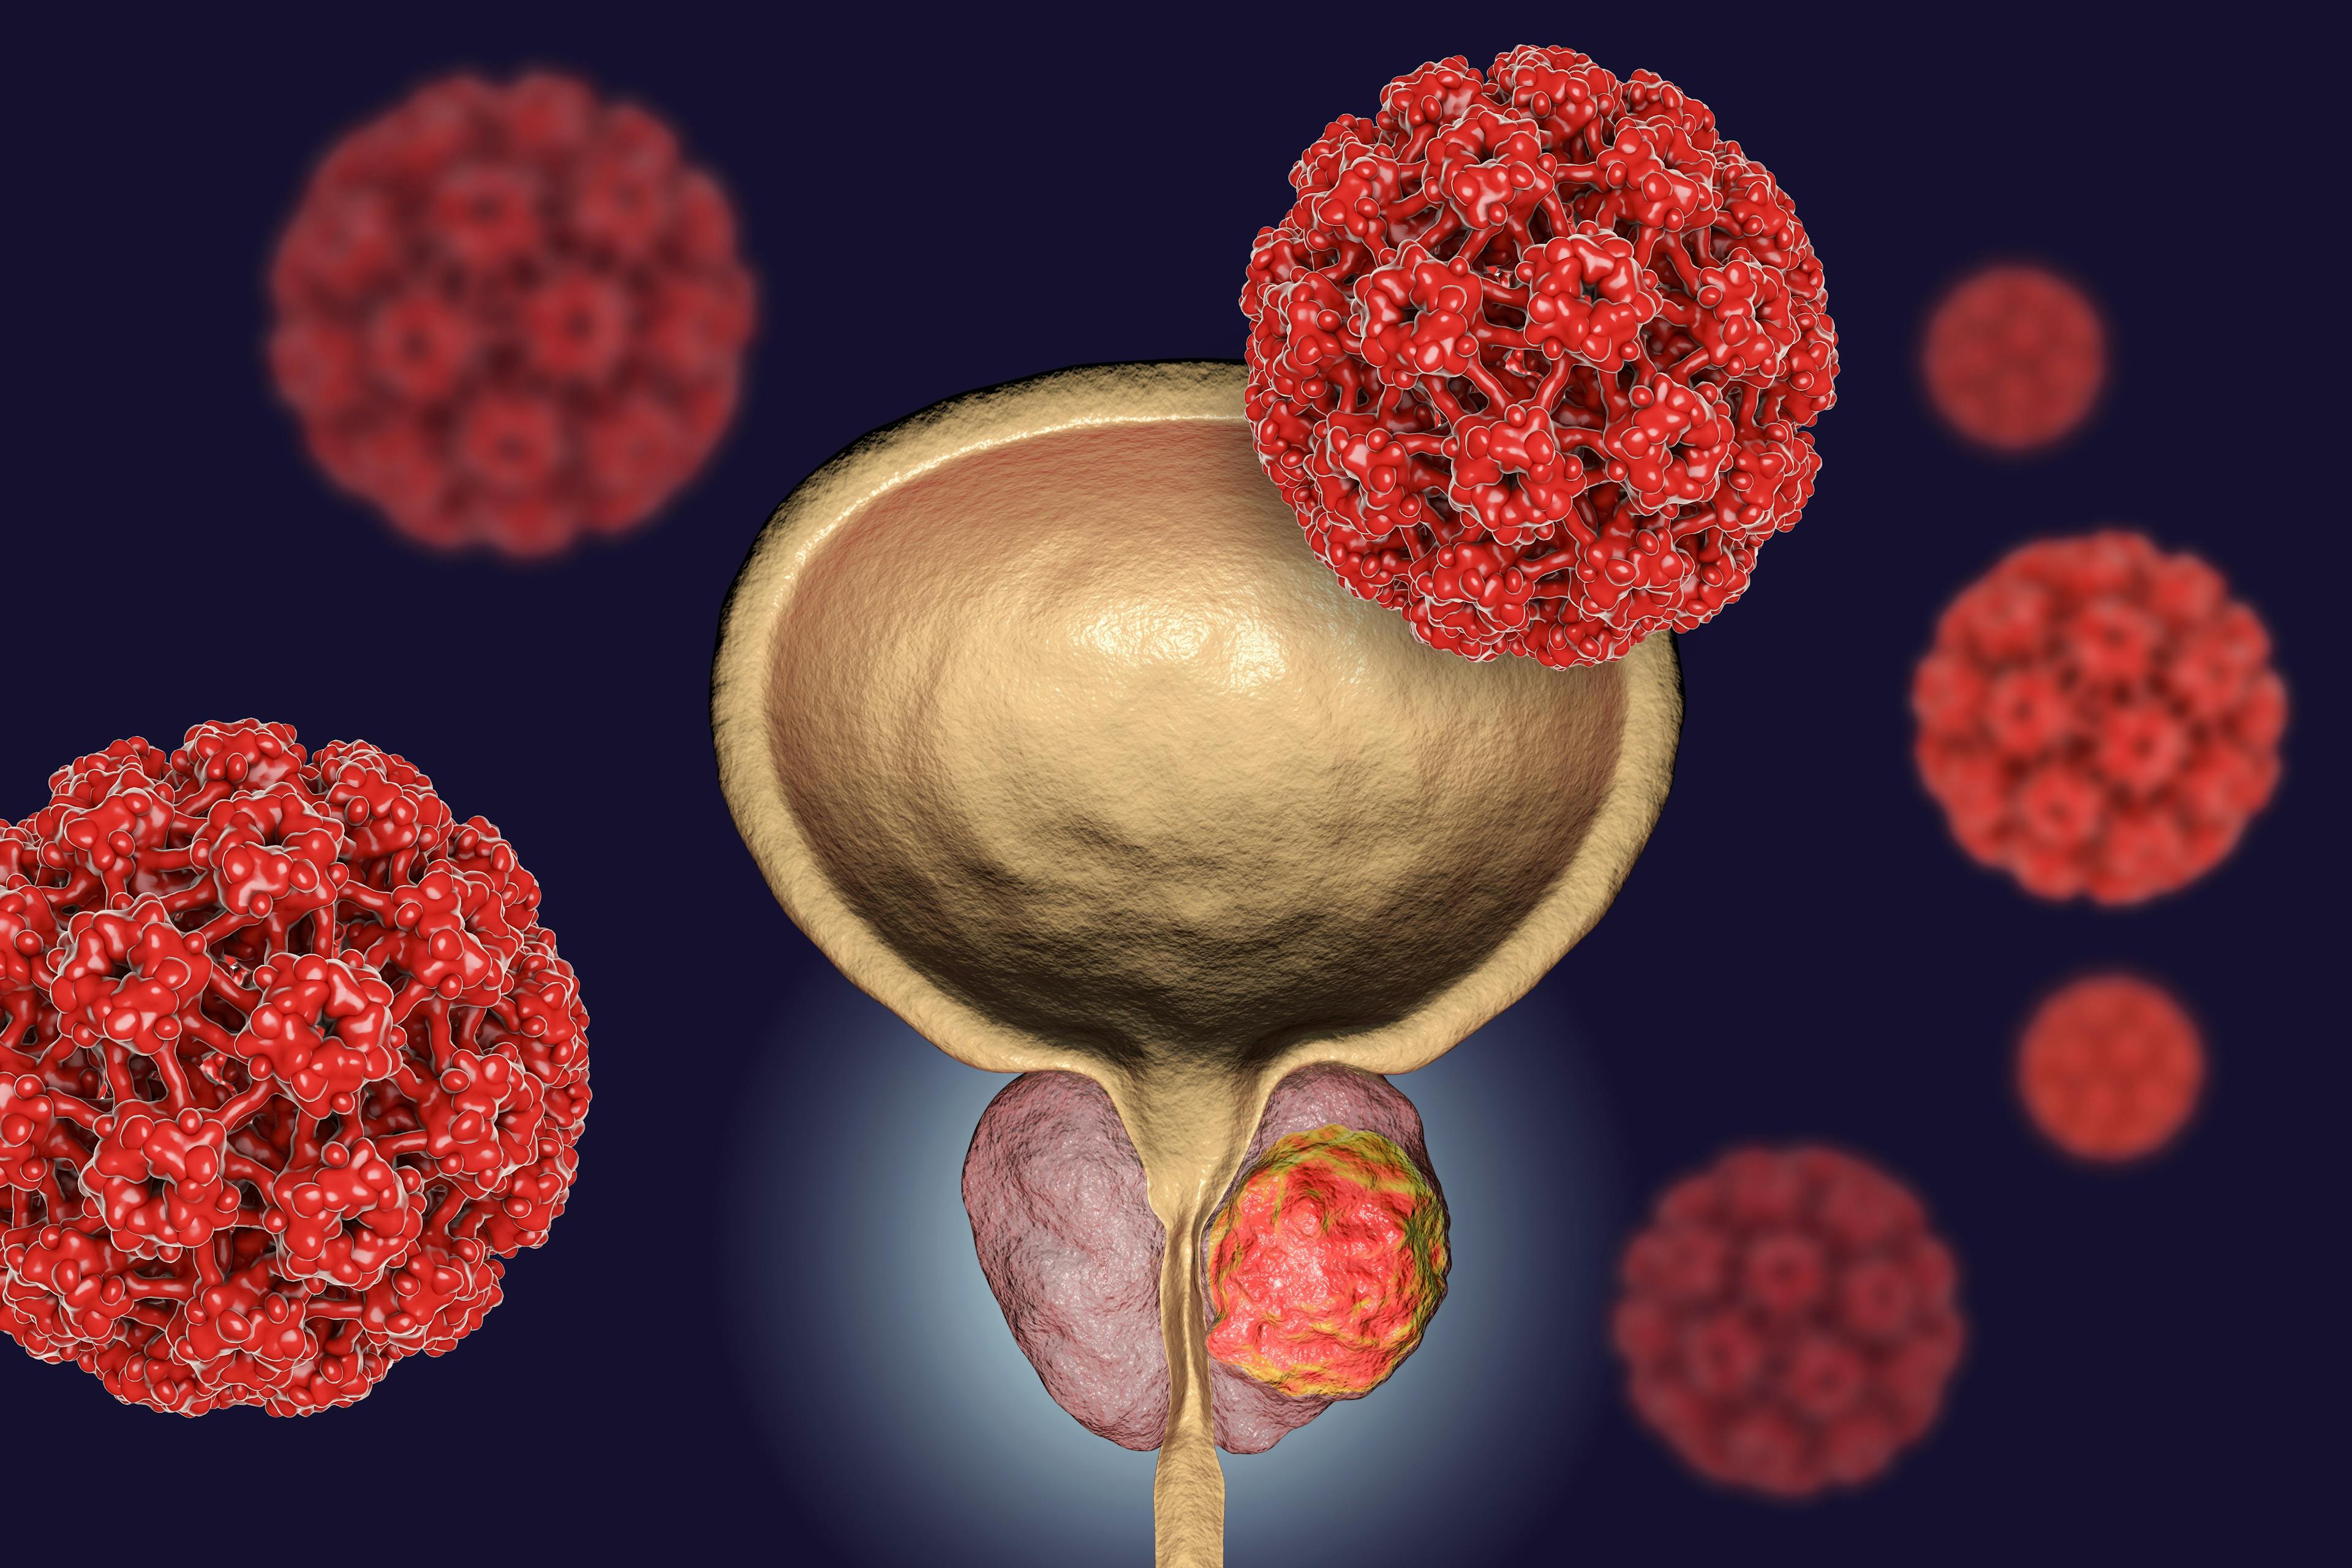 Trial Launches to Assess Novel Immunotherapy Approach in Metastatic Prostate Cancer